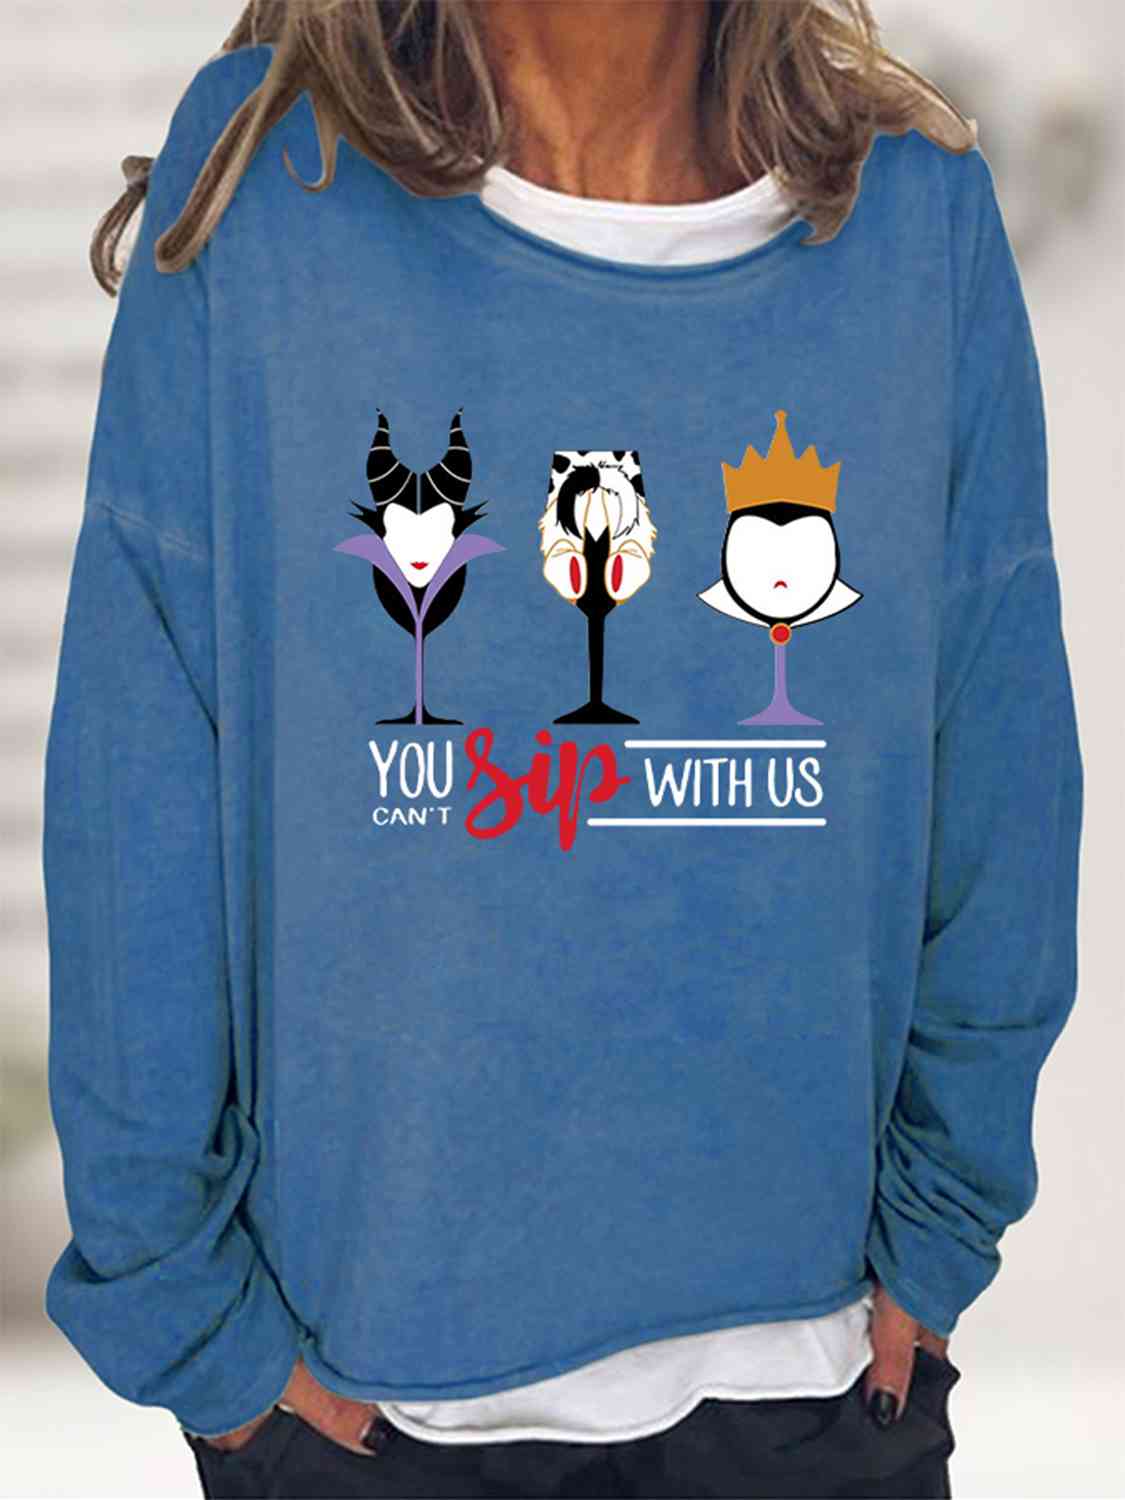 Full Size YOU CAN'T SIP WITH US Graphic Sweatshirt, MyriadMart